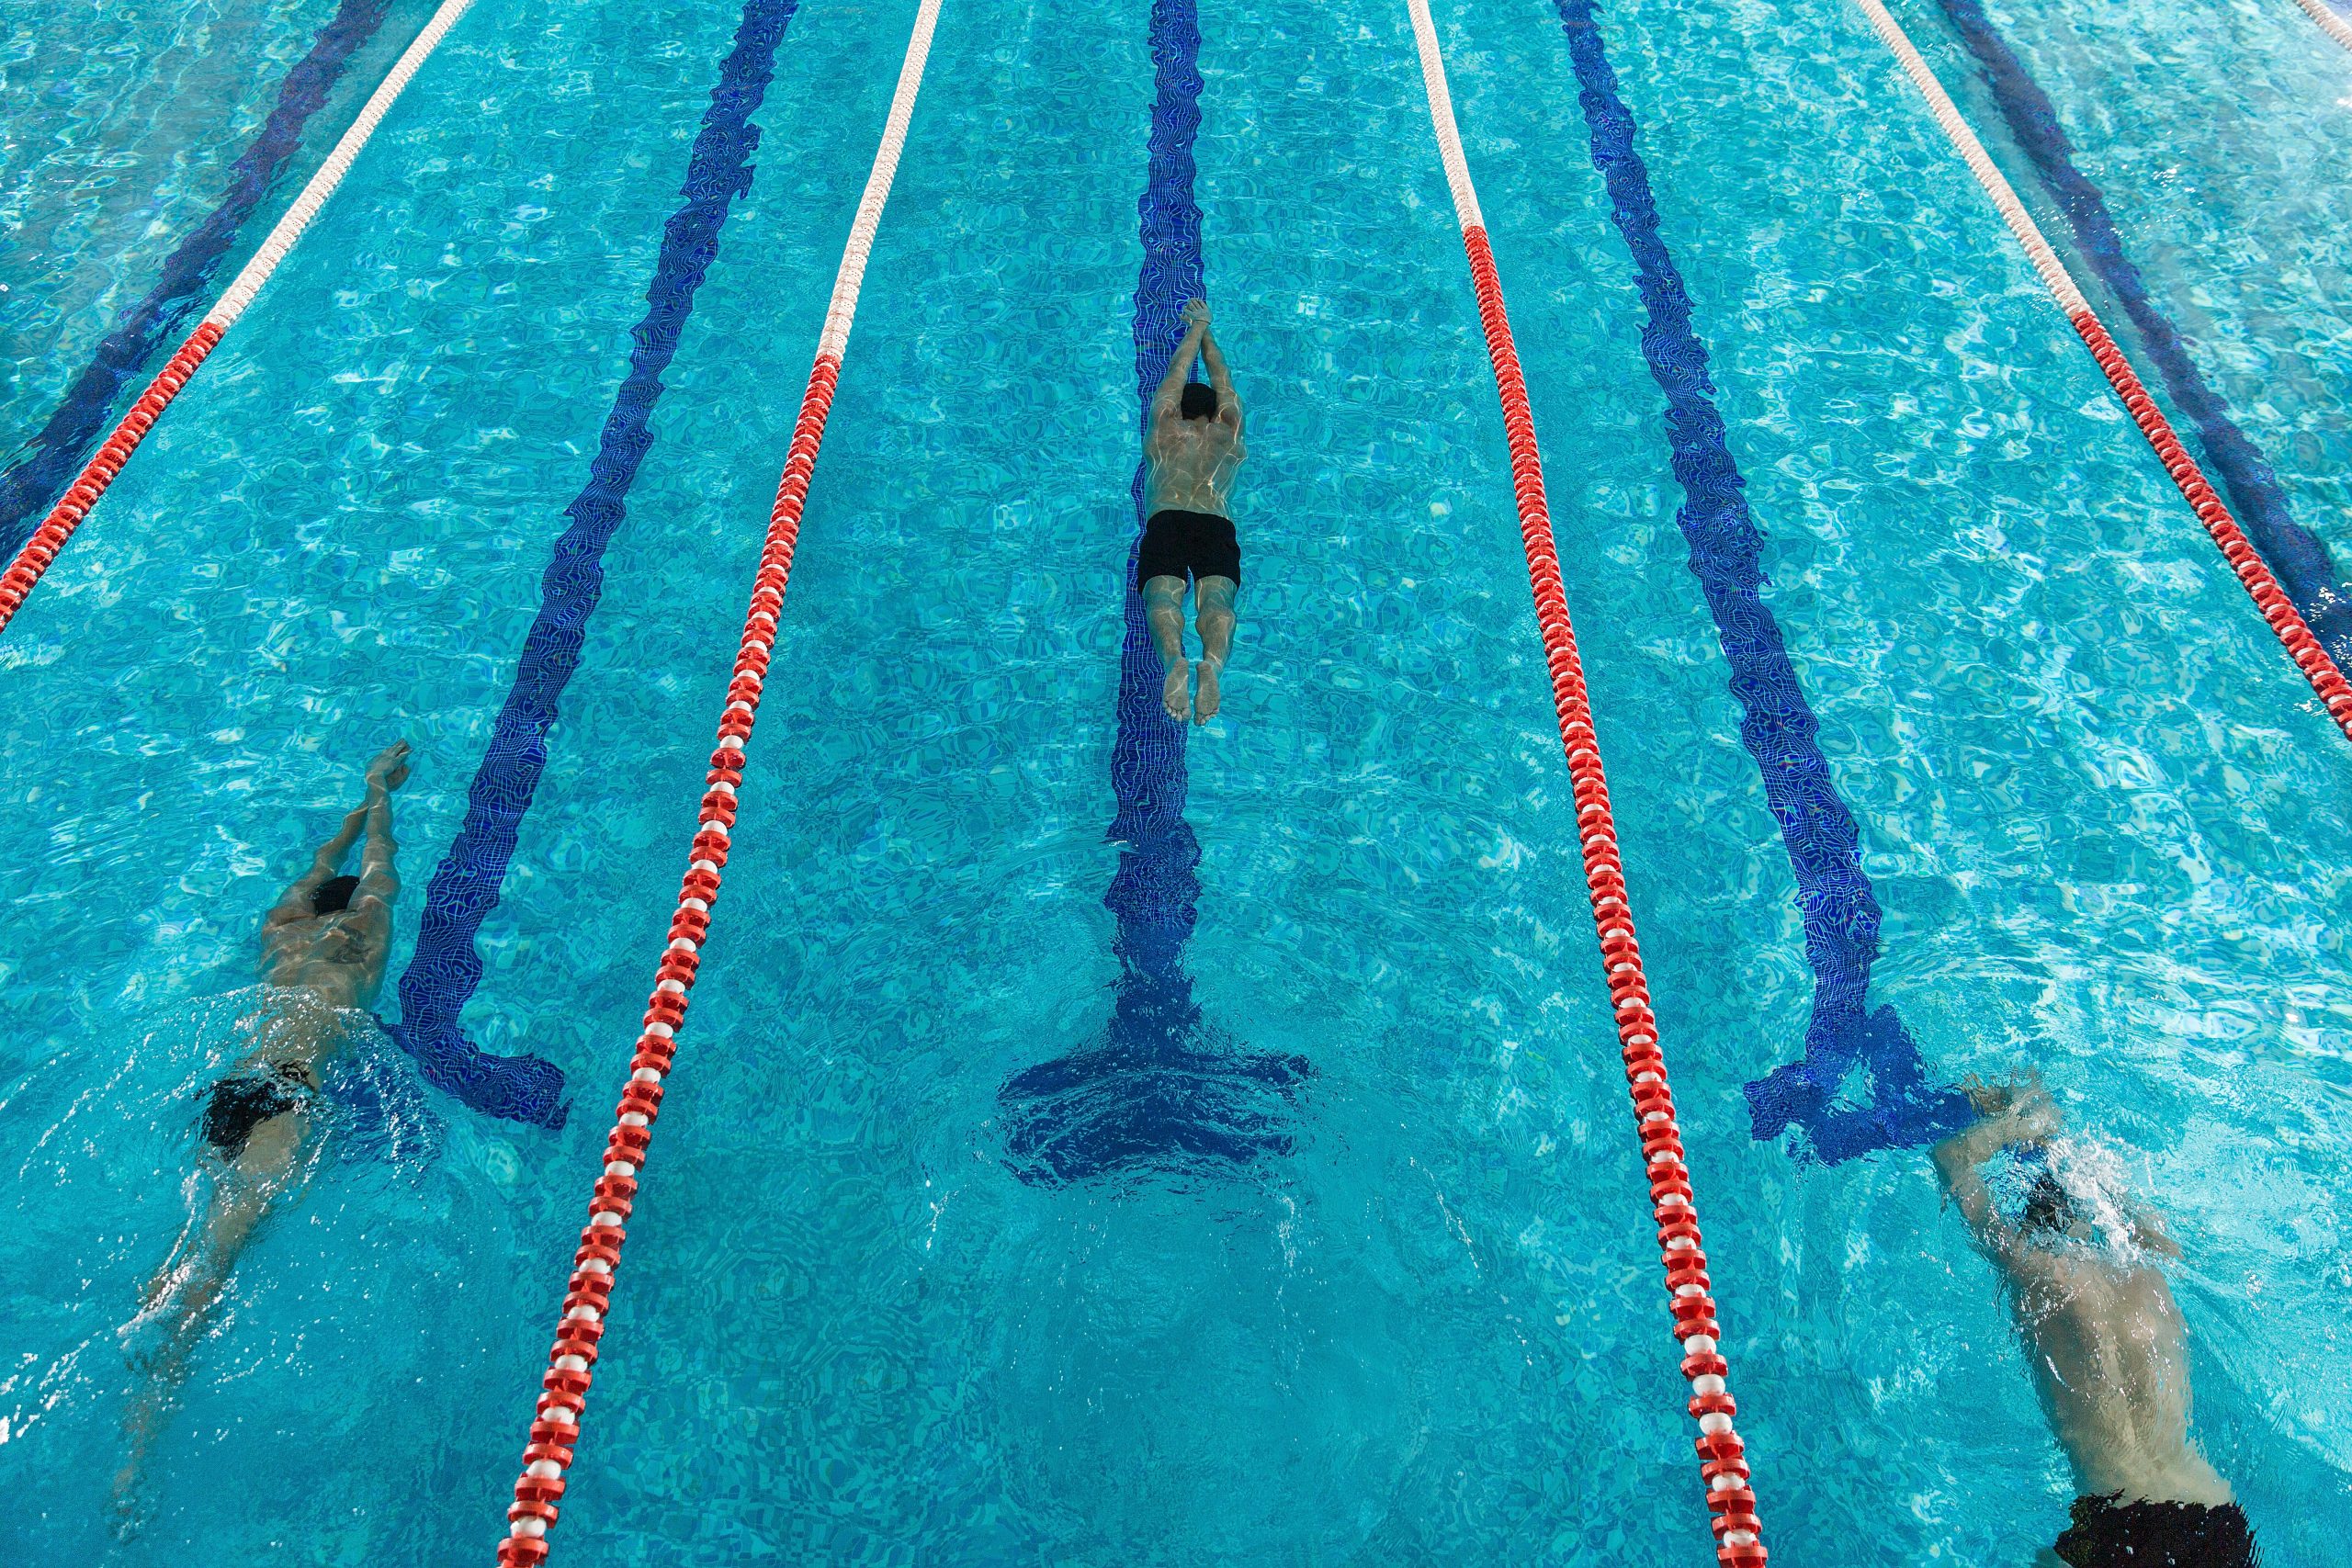 Top view of three male swimmers